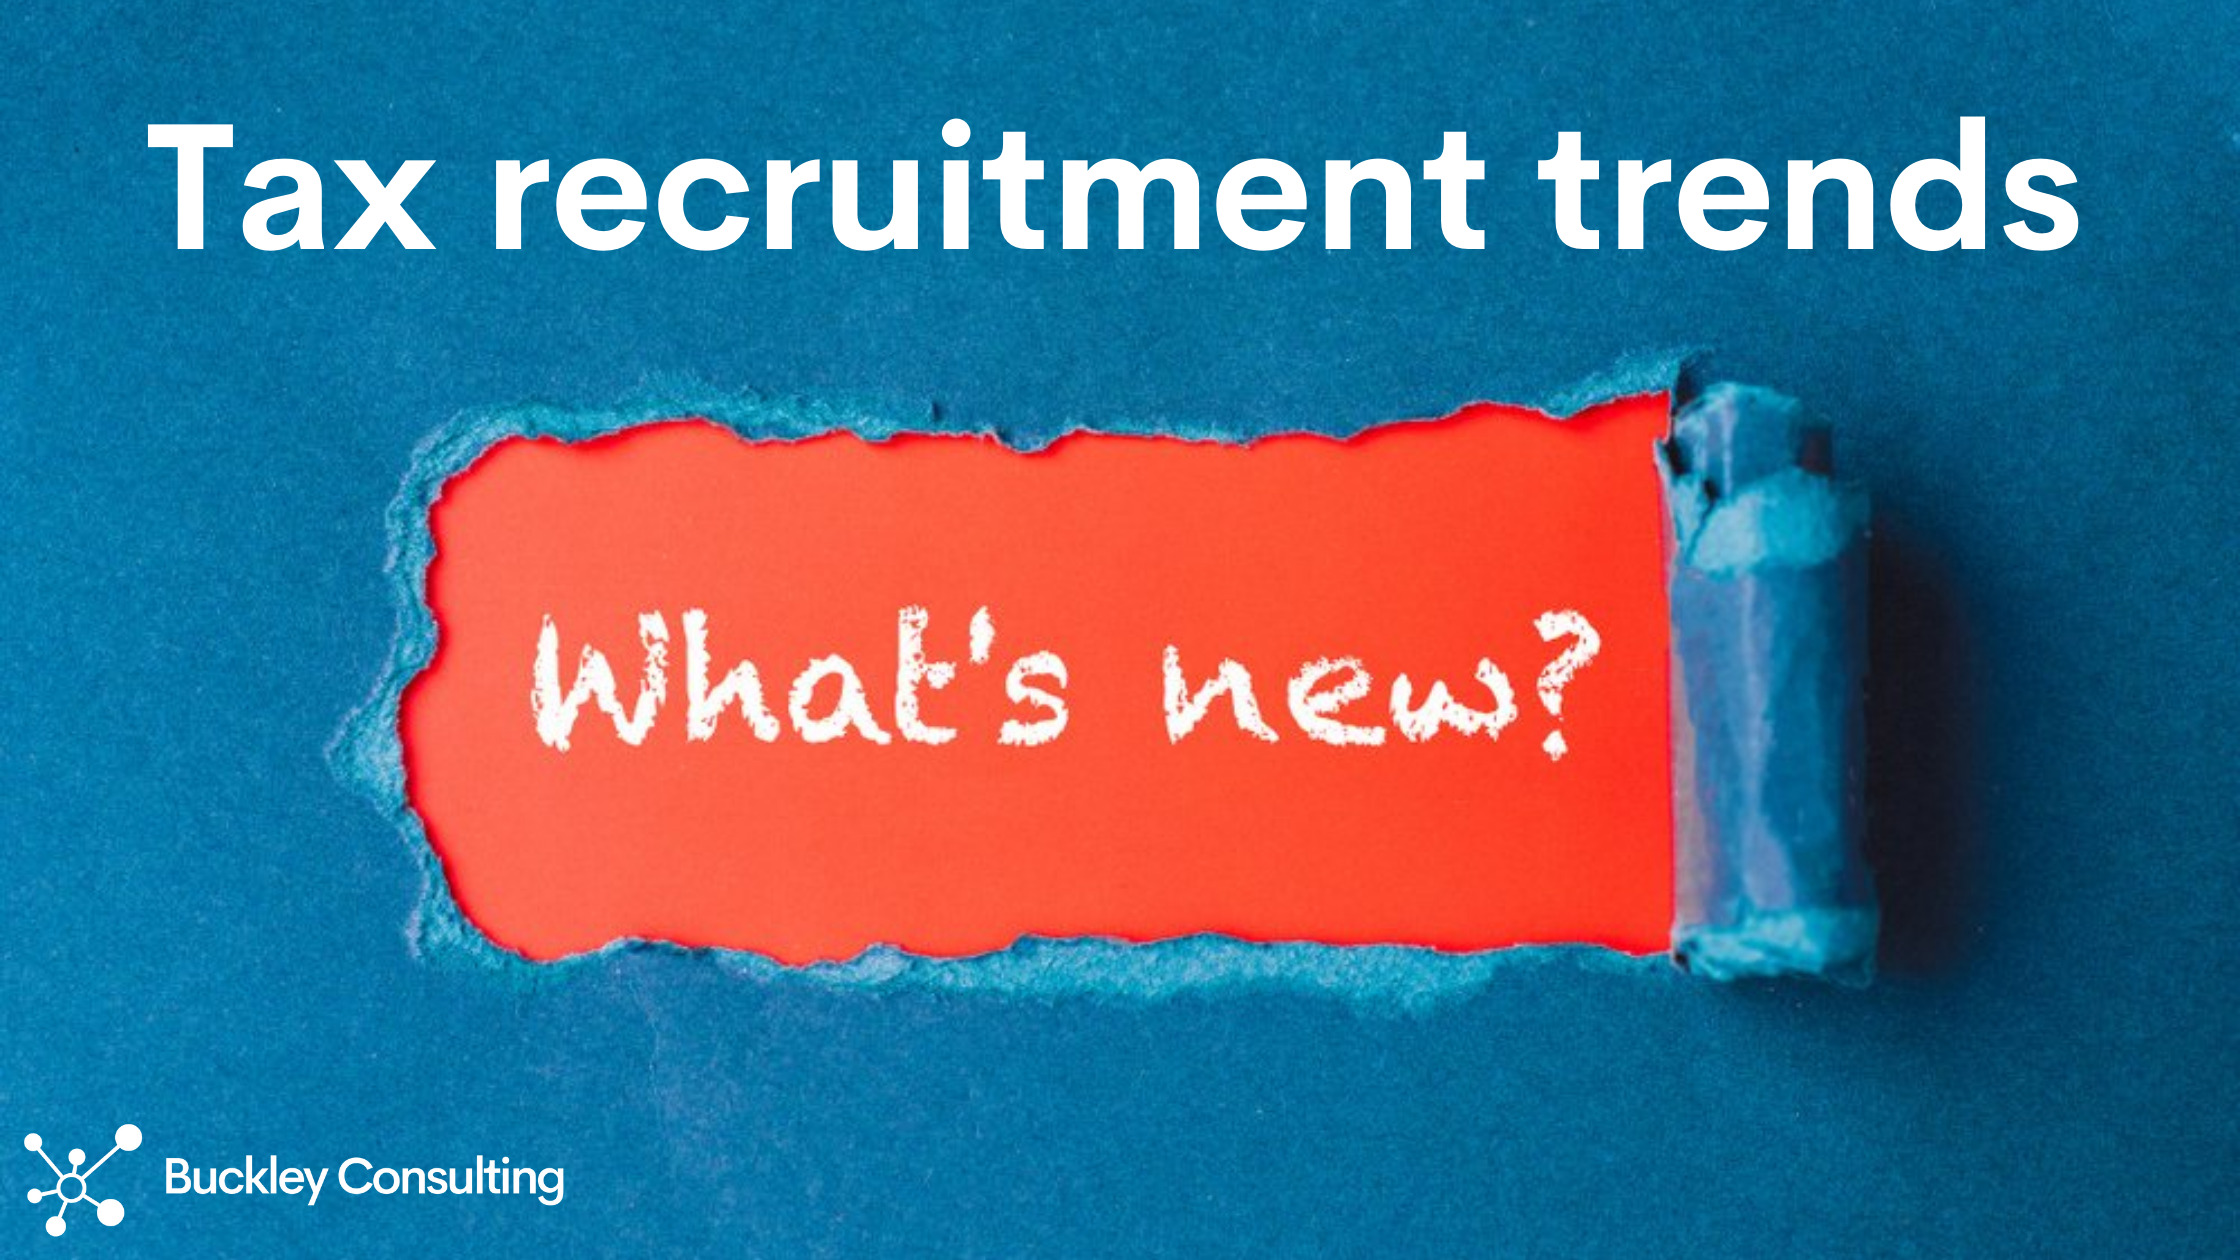 Recruitment trends - what's happening